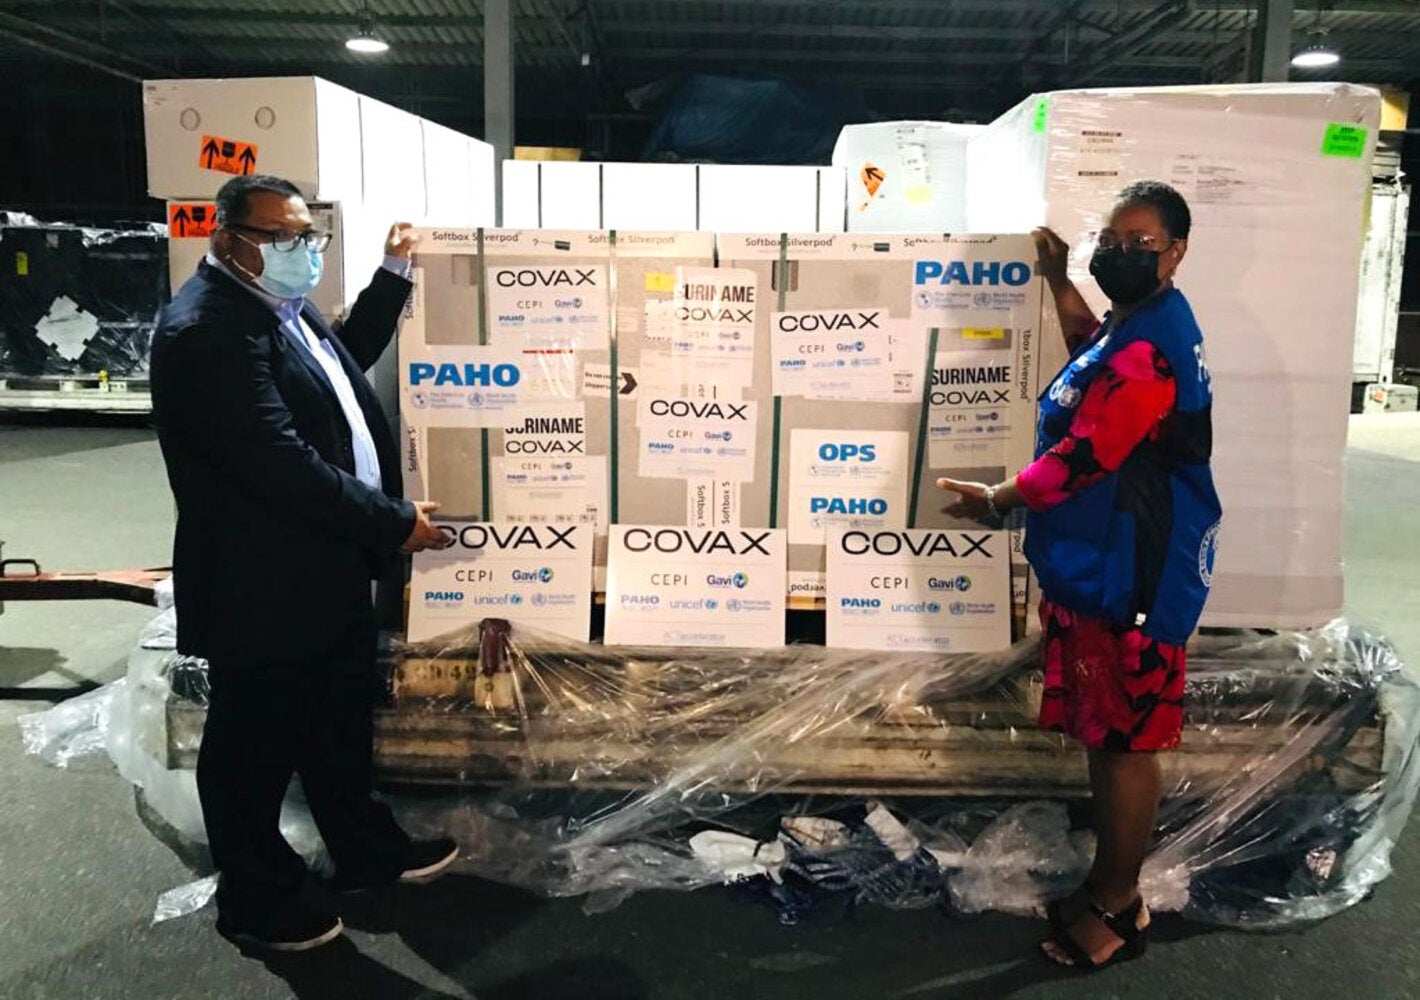 Suriname receives its first COVID-19 vaccines through the COVAX Facility